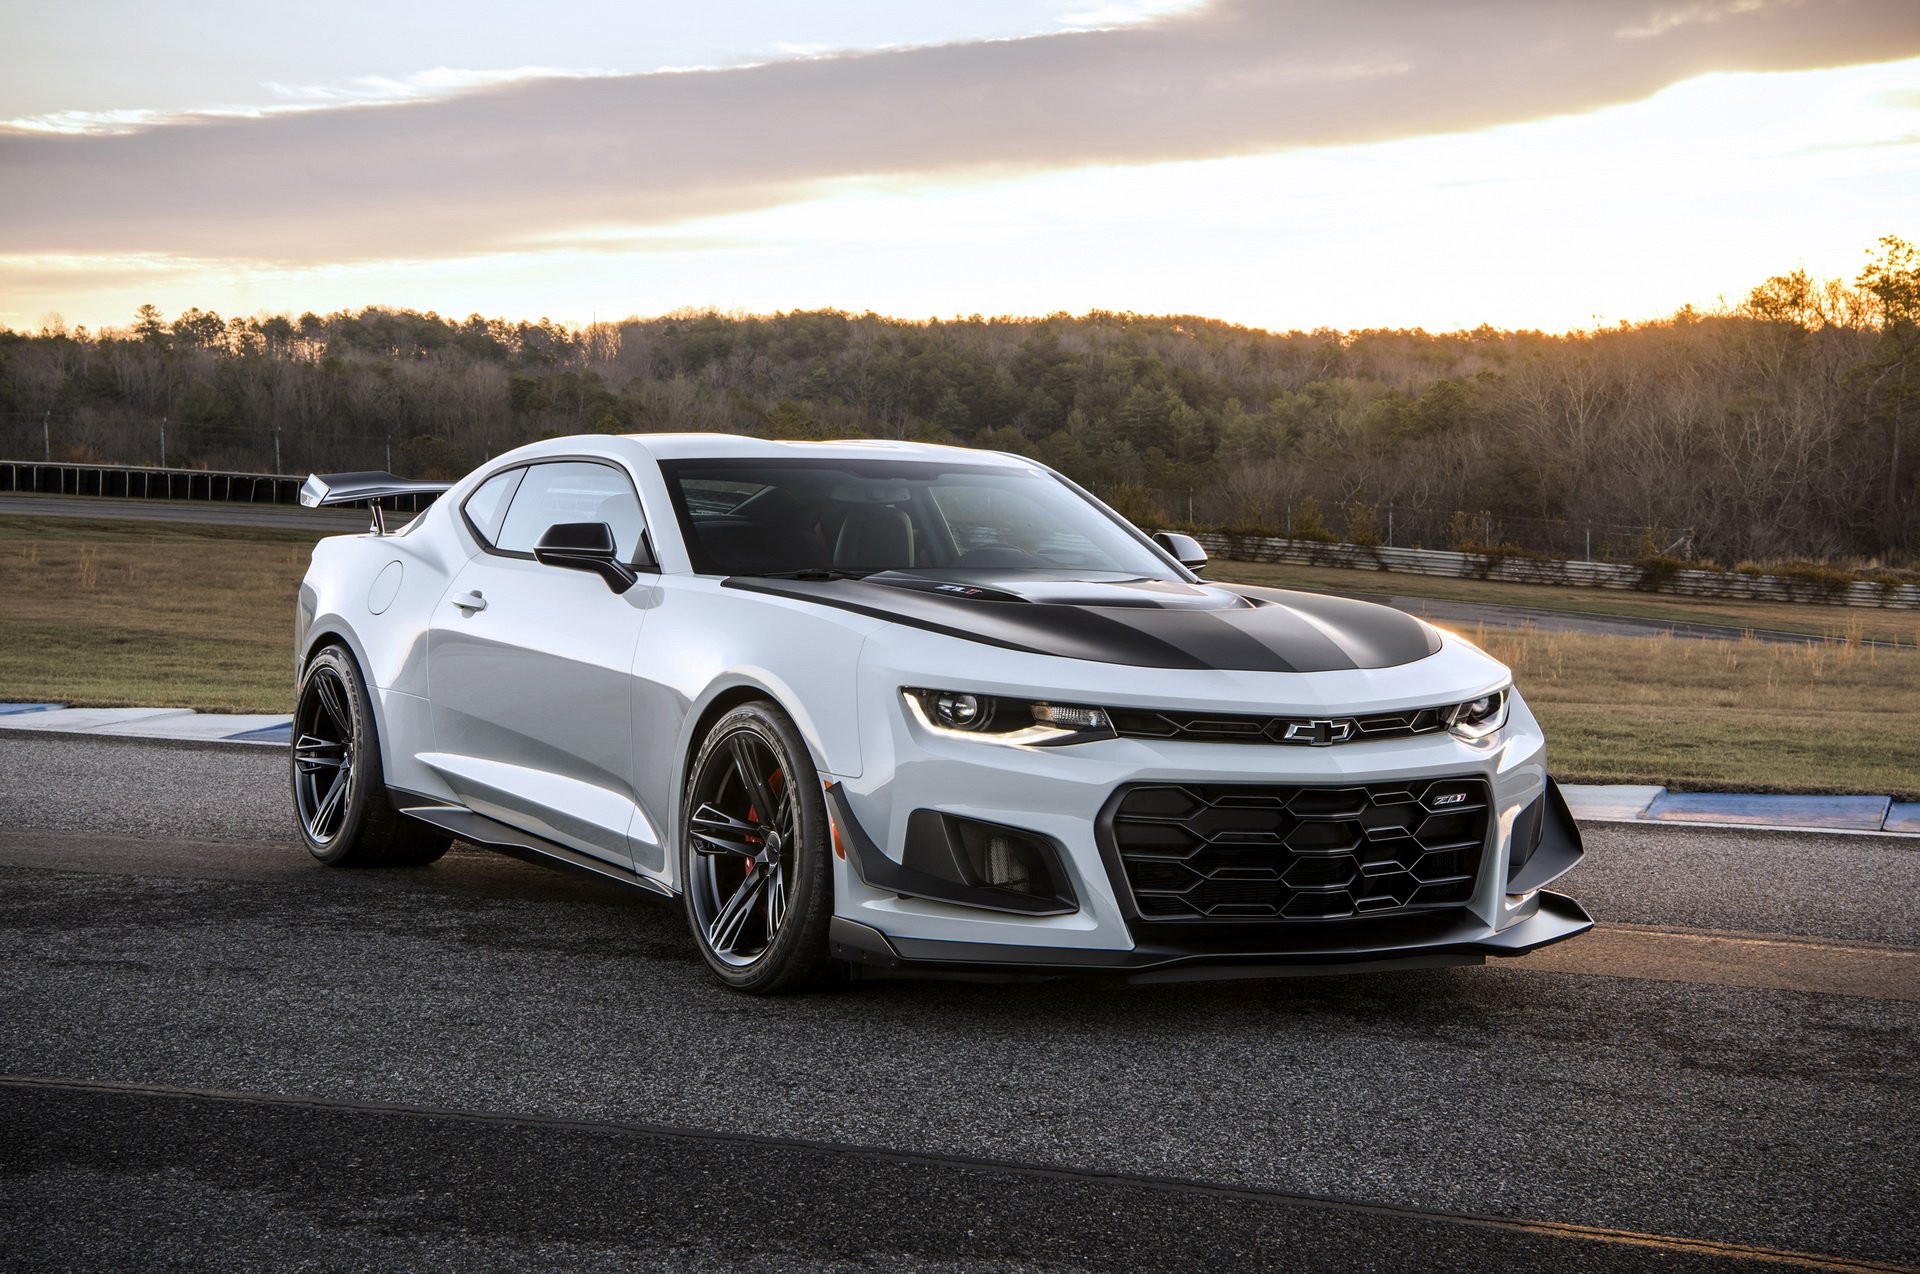 2019 Chevrolet Camaro ZL1 1LE Available With HydraMatic